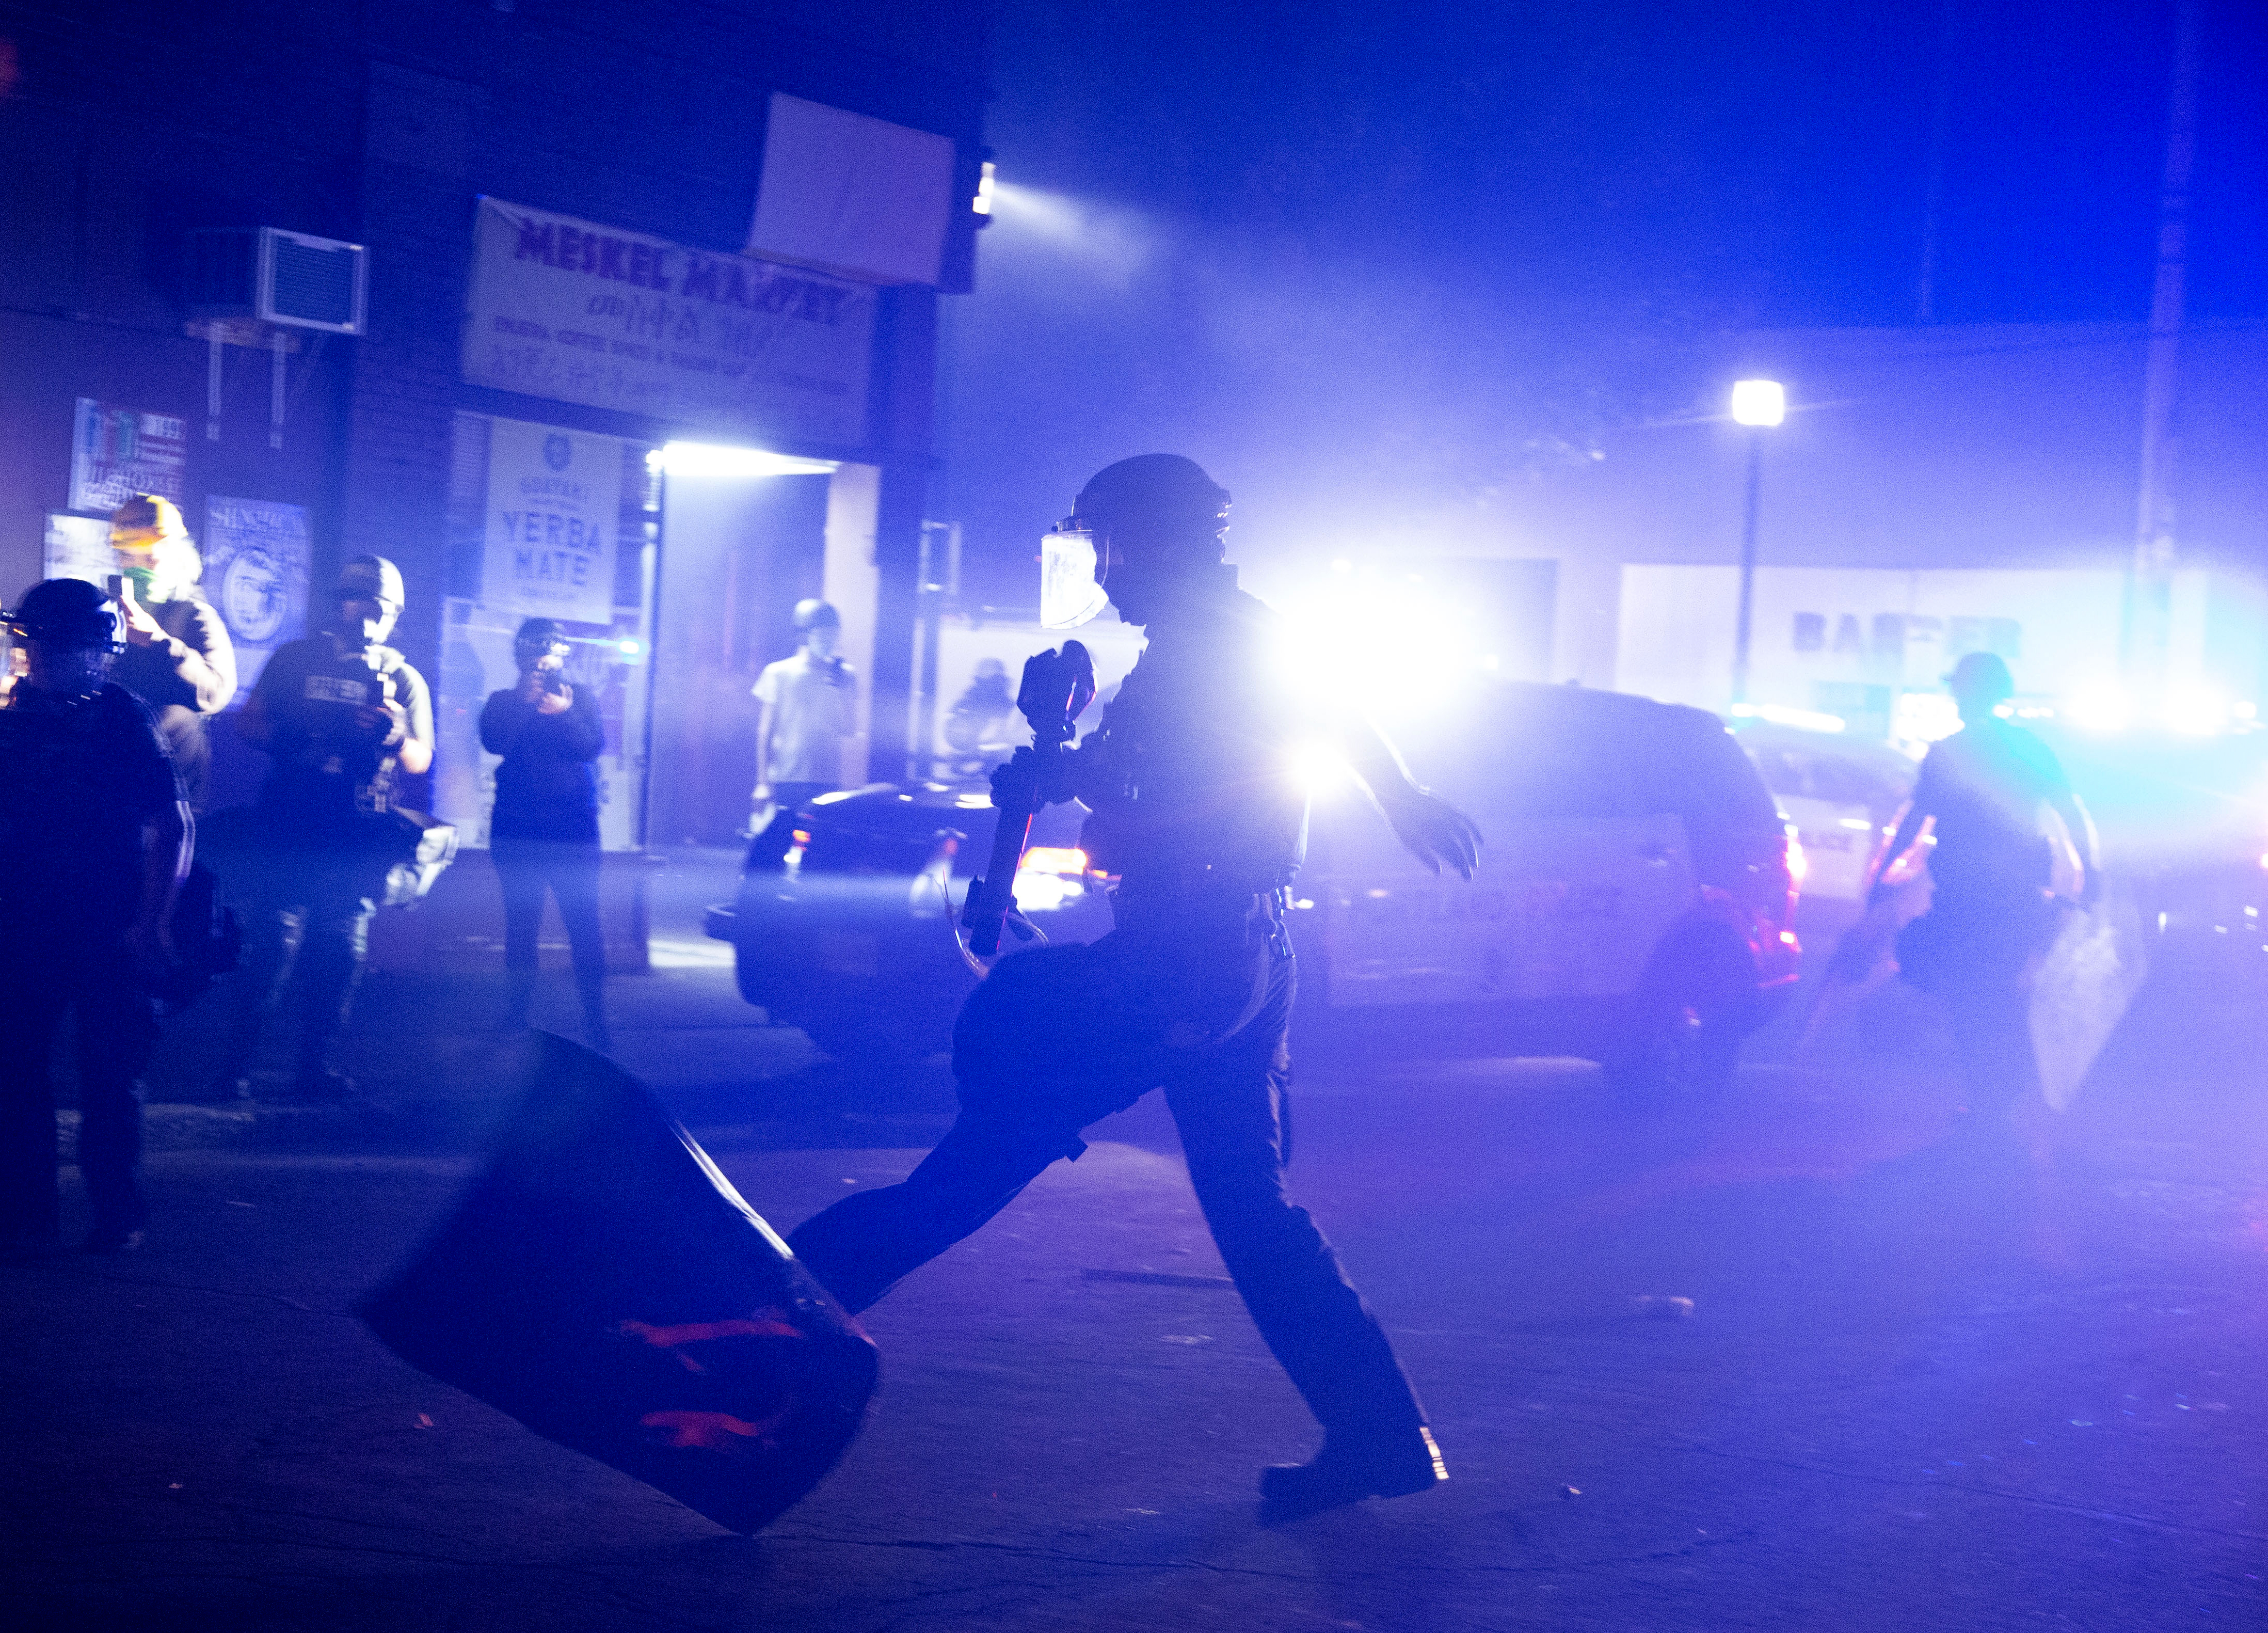 Portland Police respond to a few dumpsters on fire by pushing protesters away from the area in North Portland during what they called an unlawful assembly.  August 14, 2020 Beth Nakamura/Staff